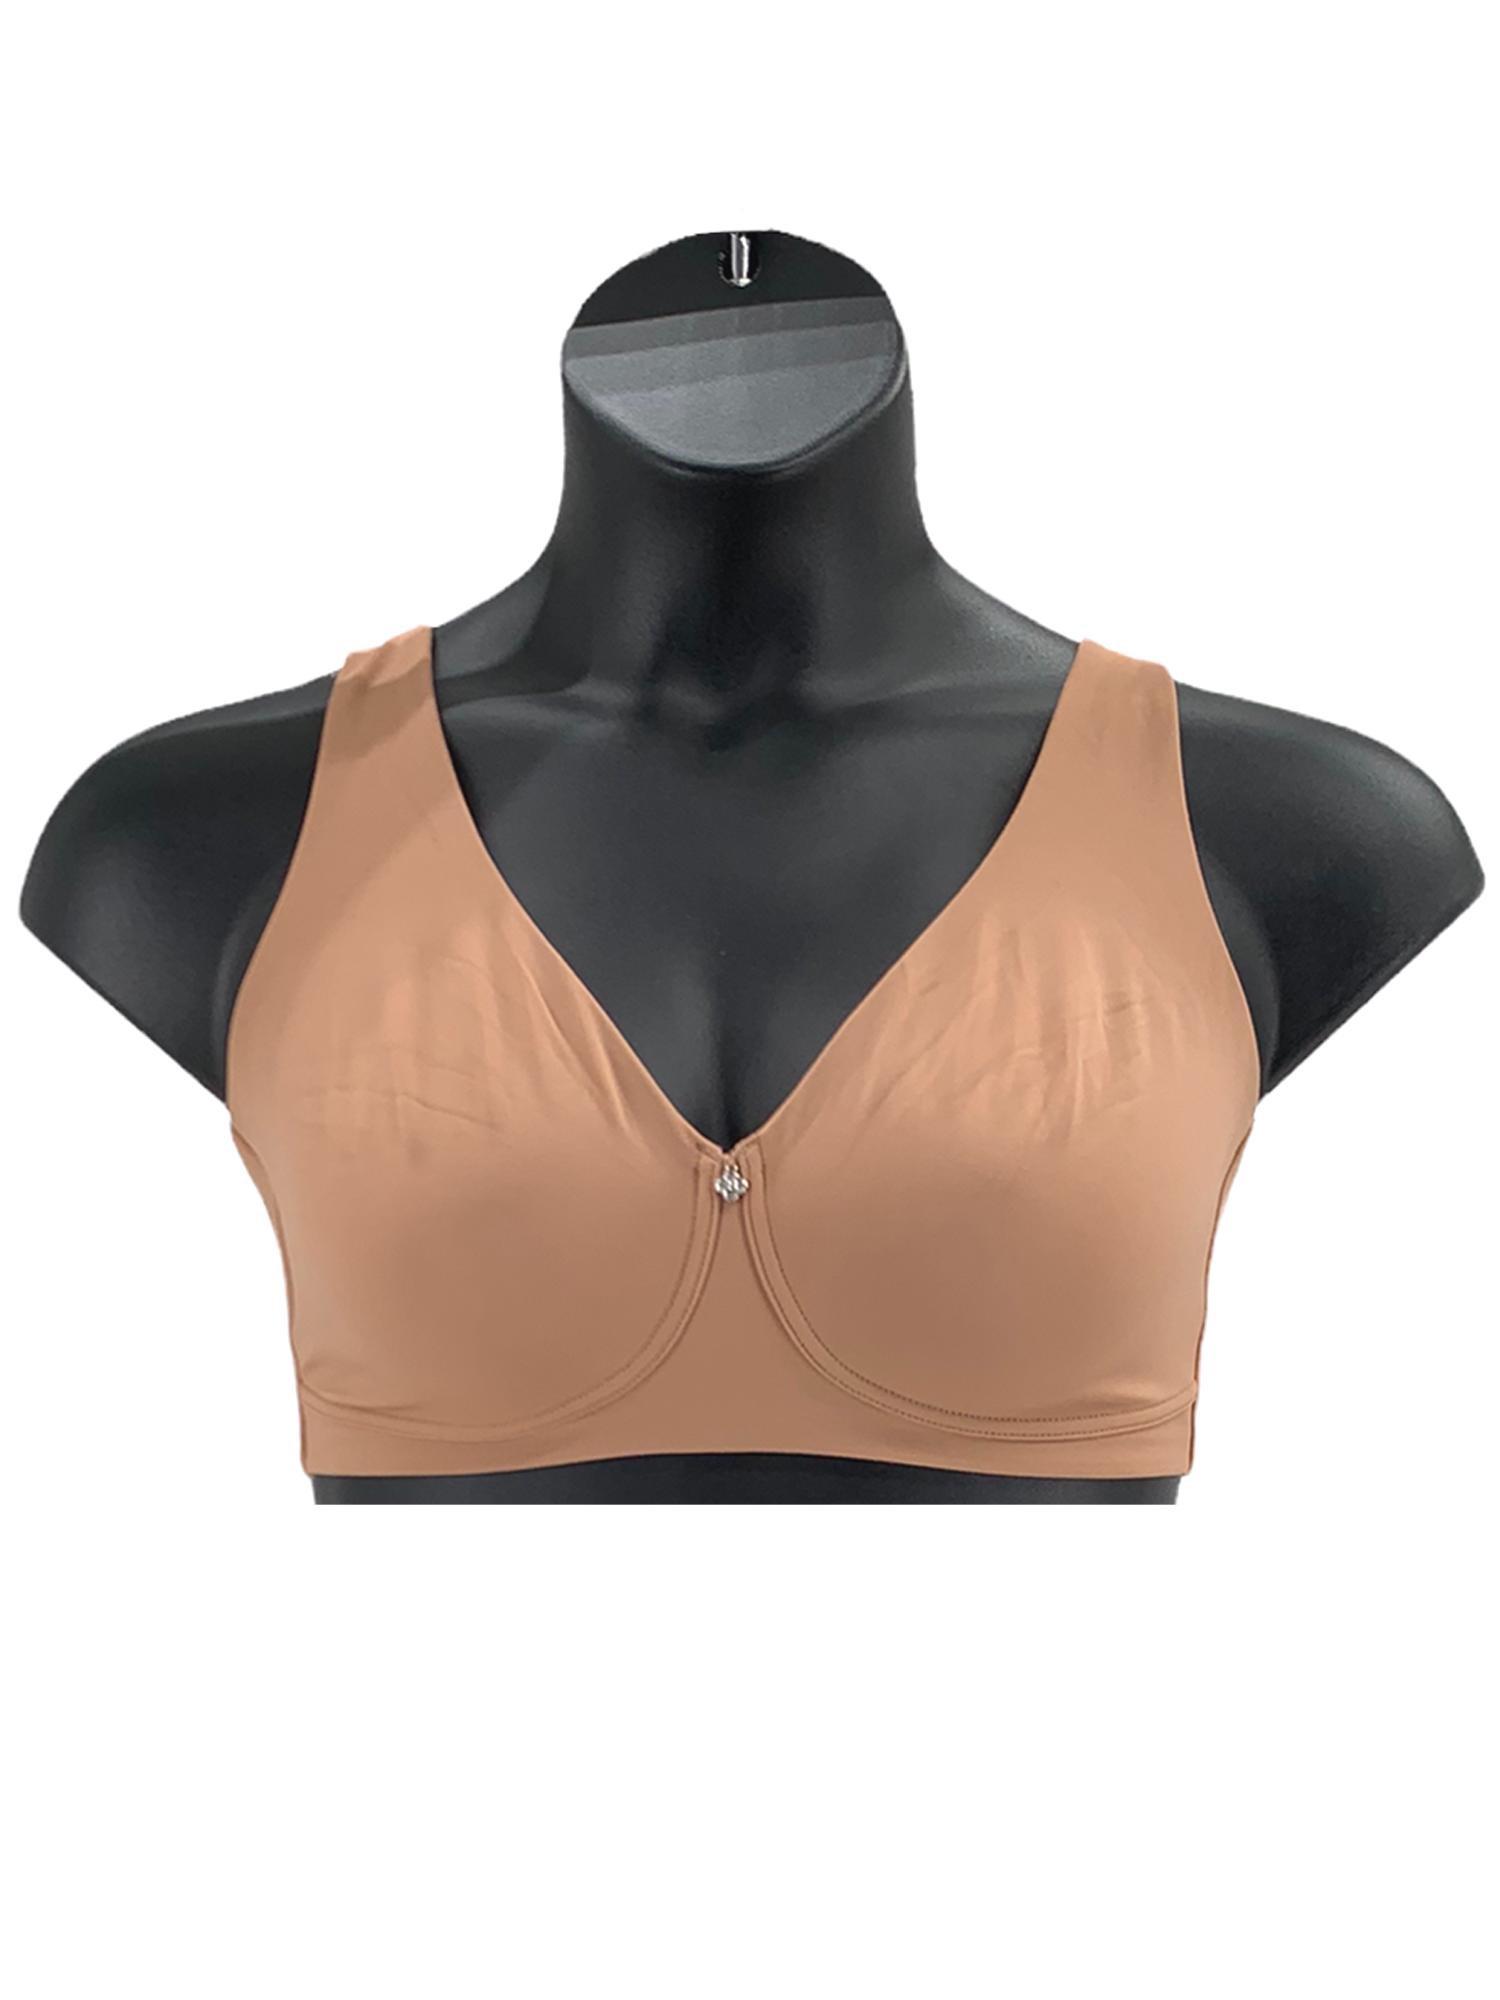 As Is Breezies Modern Micro Underwire Contour Bra 